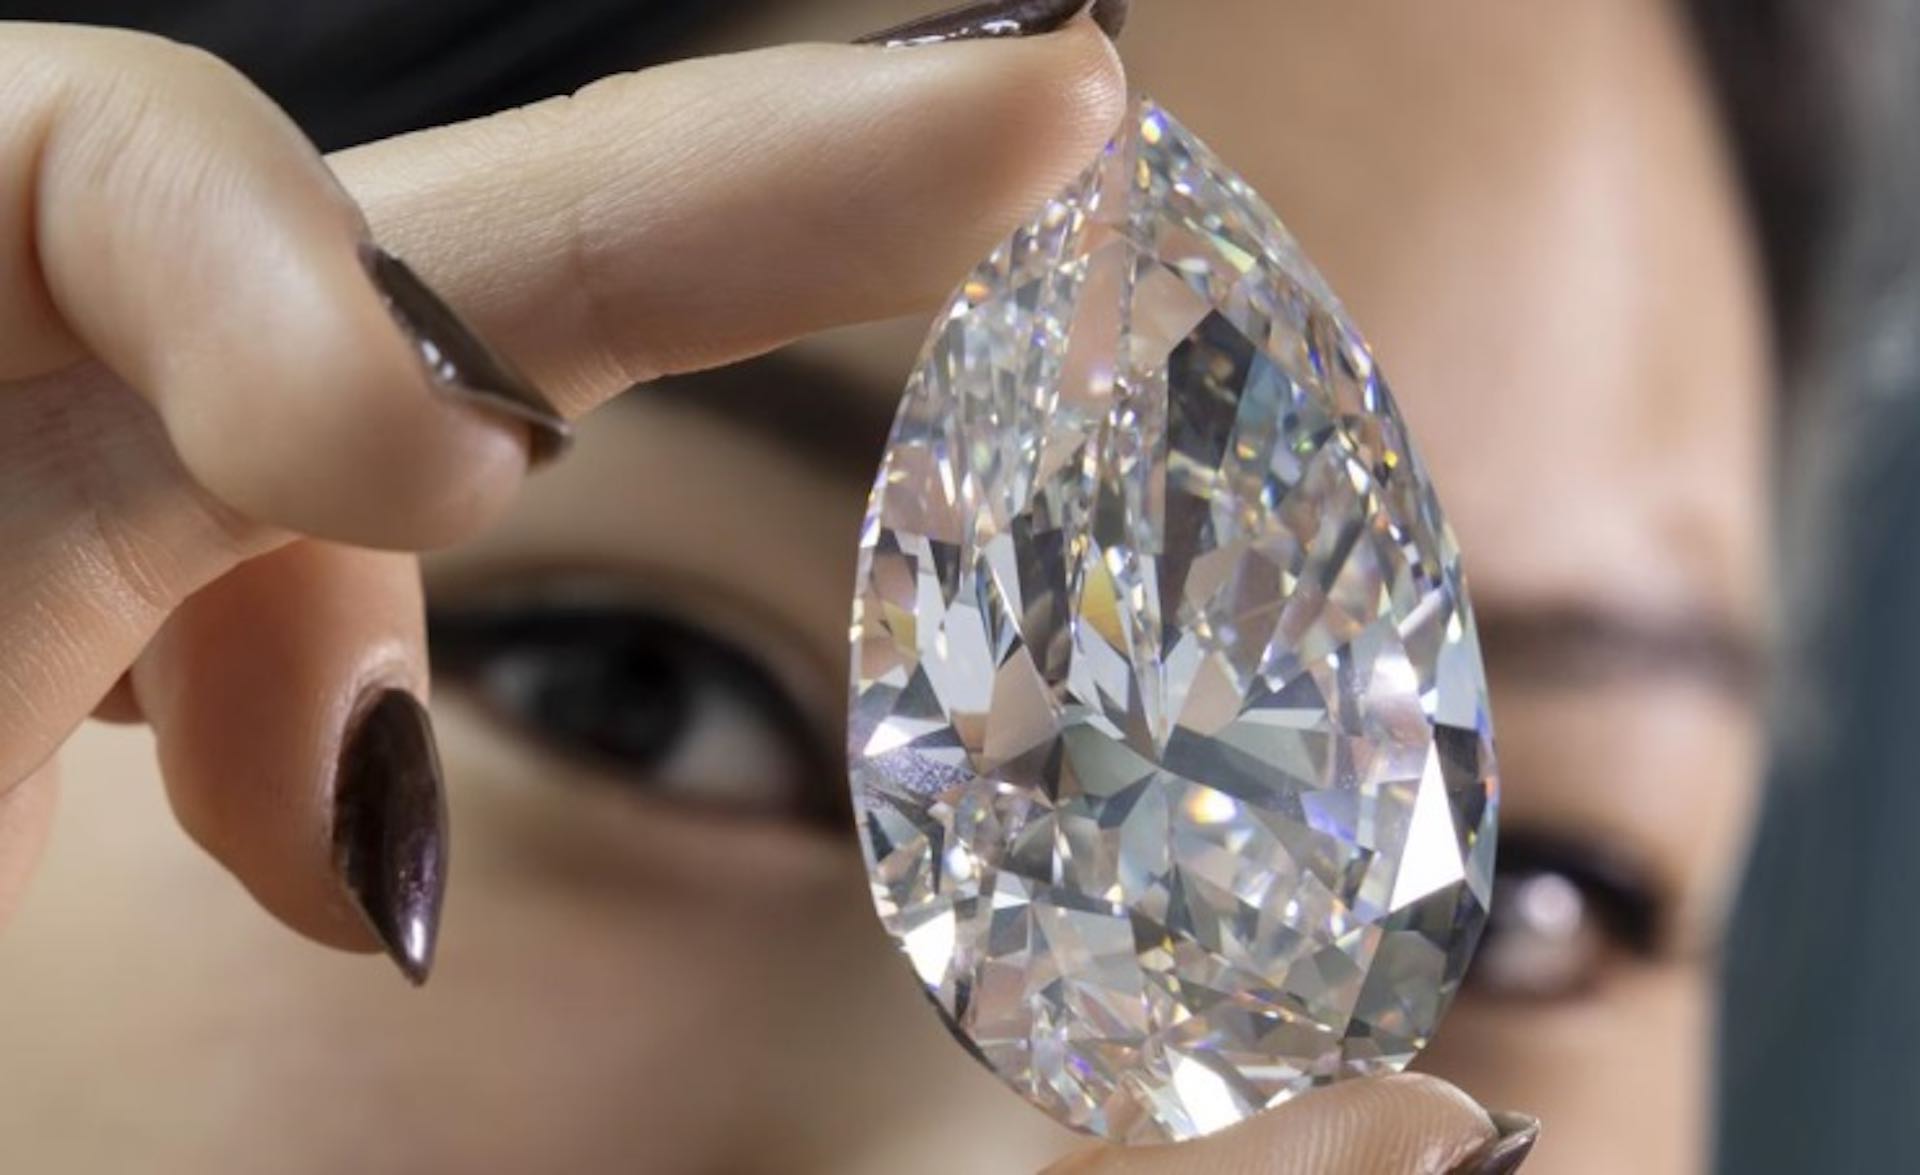 An egg-sized diamond fetches over $21 million at the Geneva sale